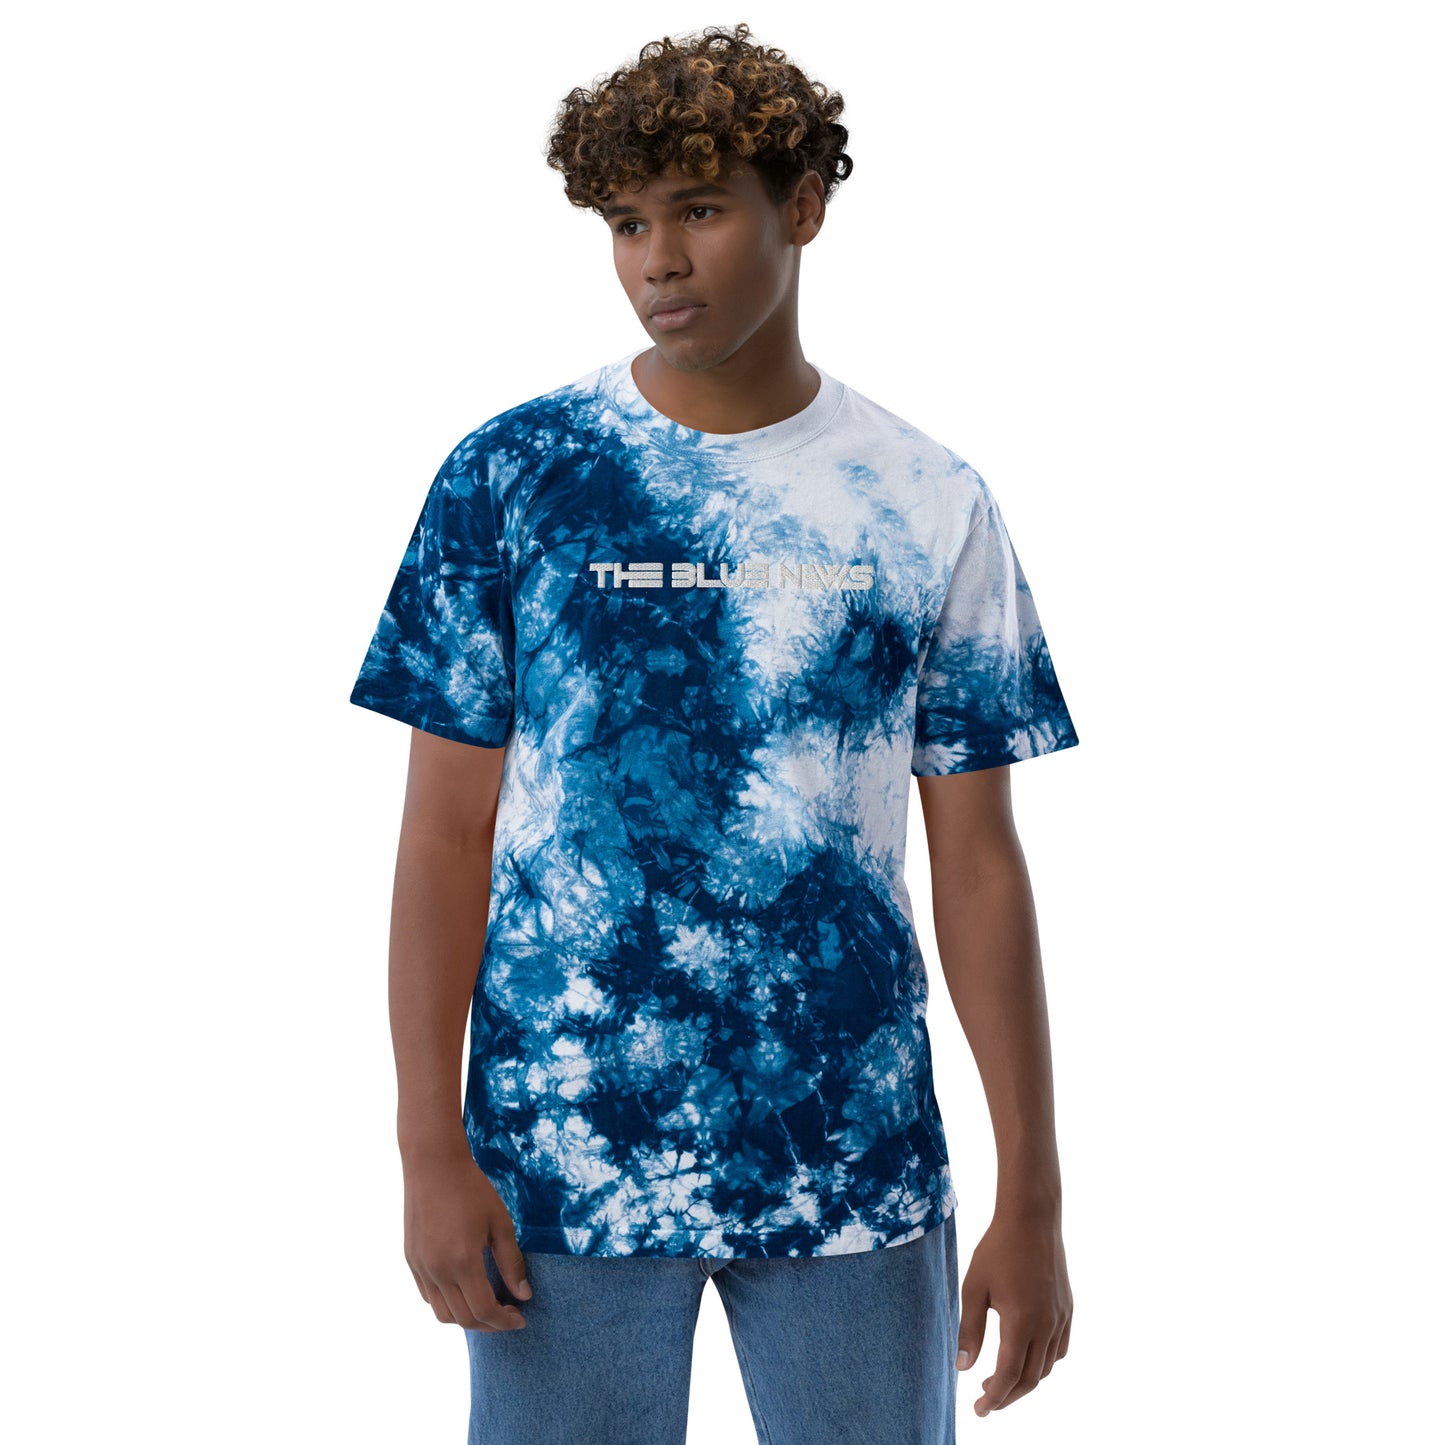 Oversized tie-dye t-shirt with embroidered band logo